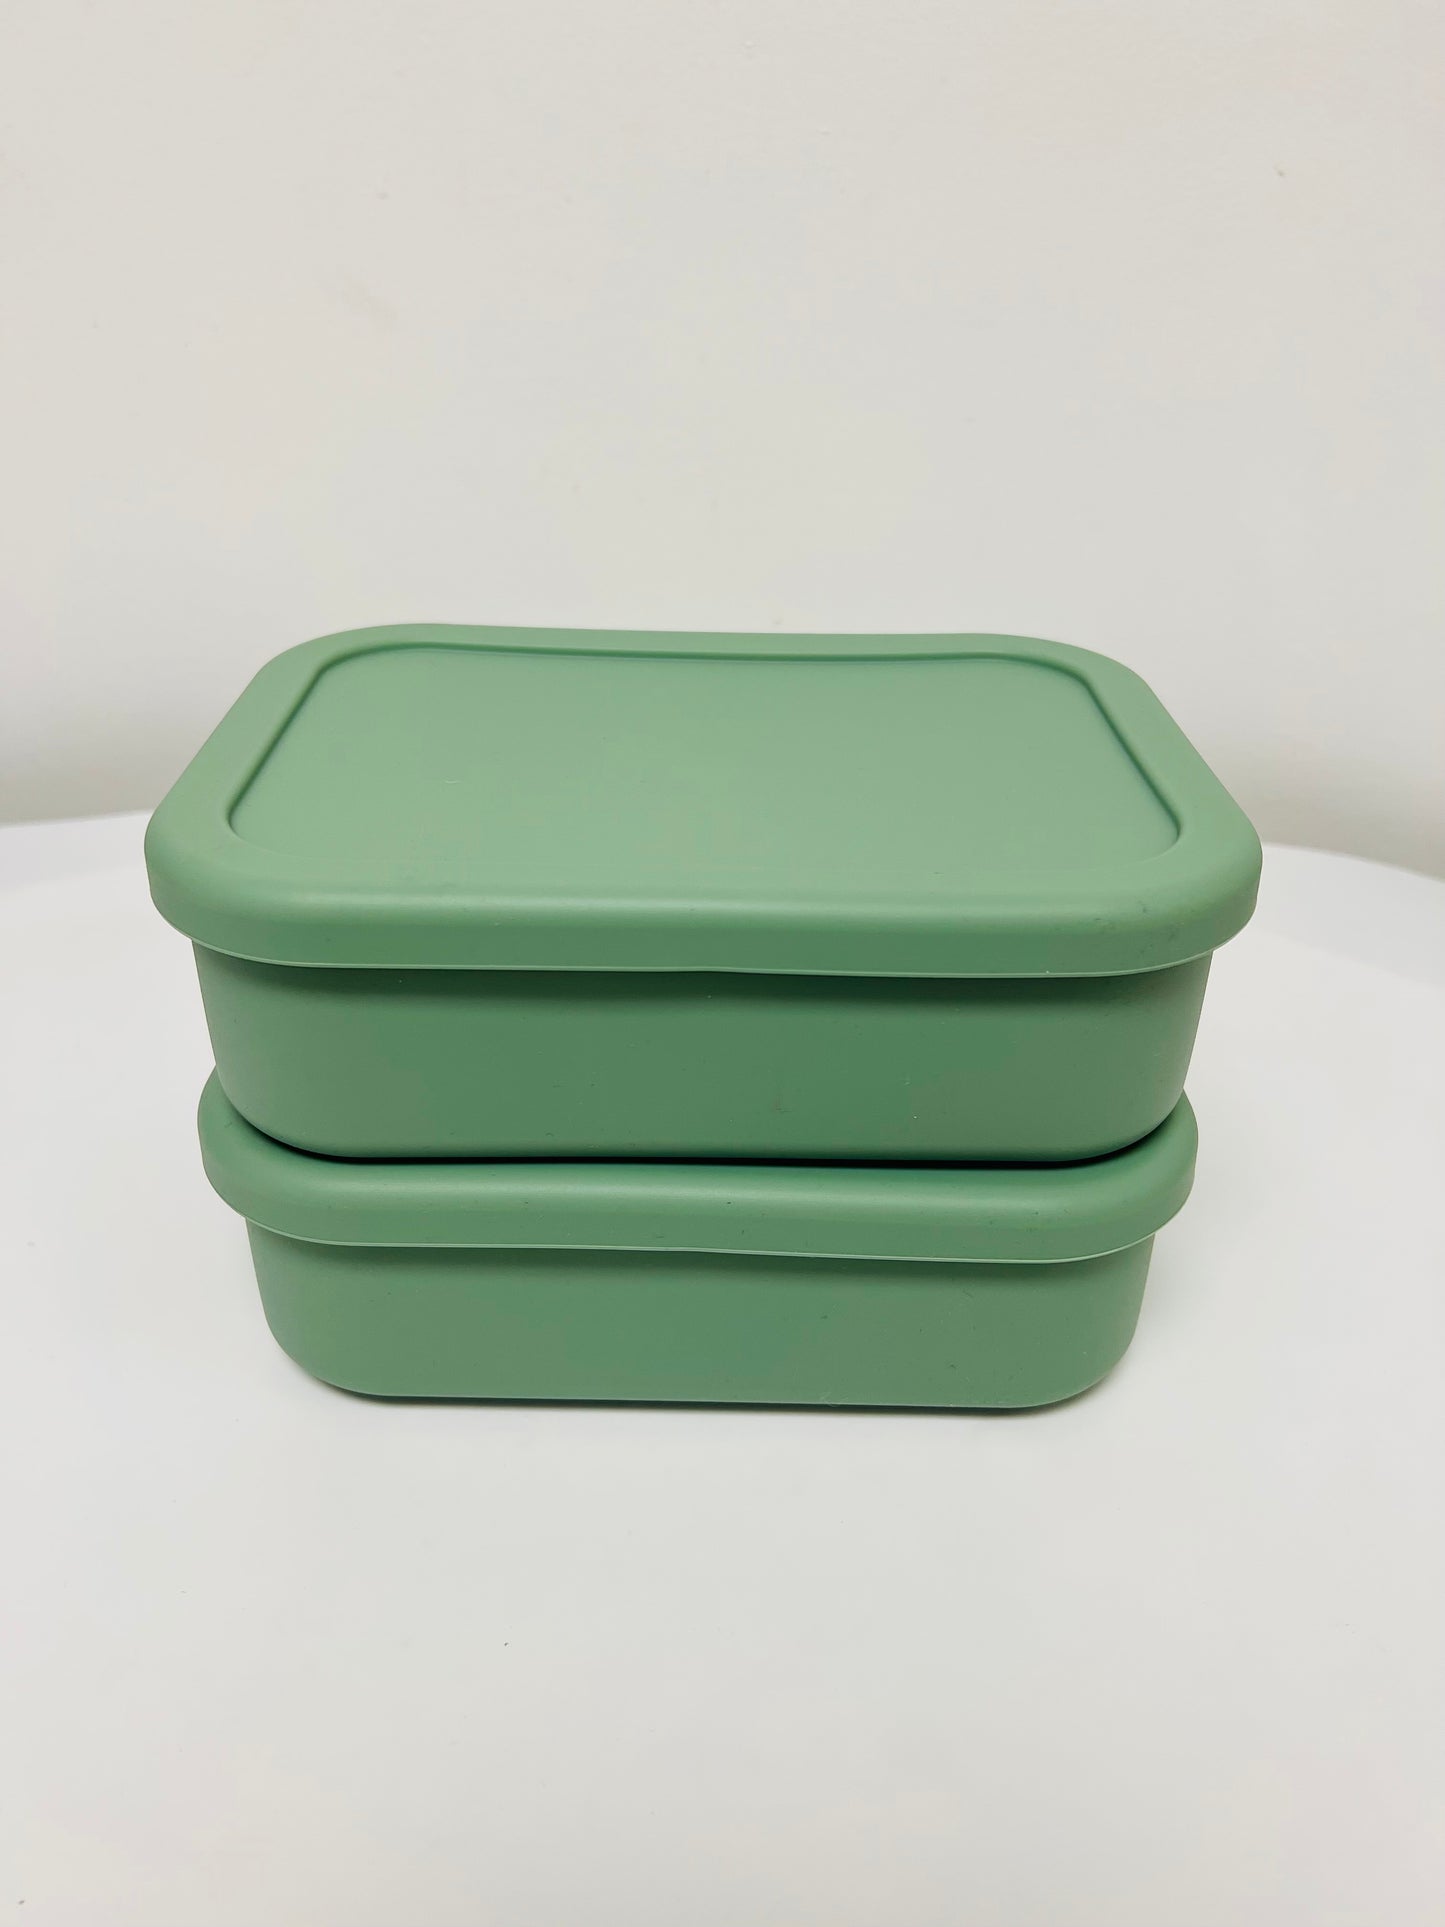 Lunch Bento Box - Silicone Bento Boxes for Lunch